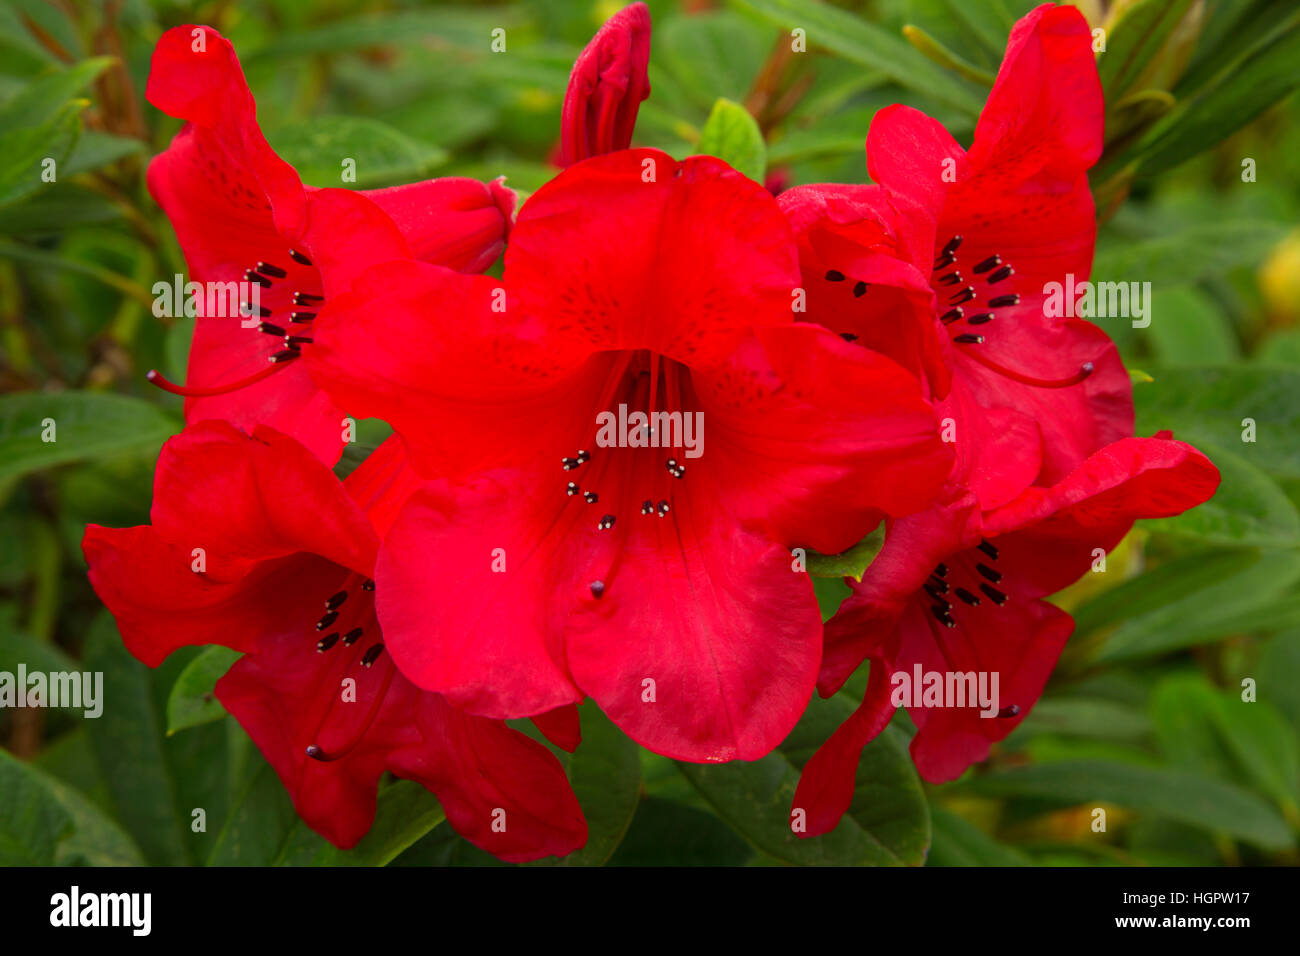 Rhododendron bloom, George Rogers Park, Lake Oswego, Oregon Stock Photo